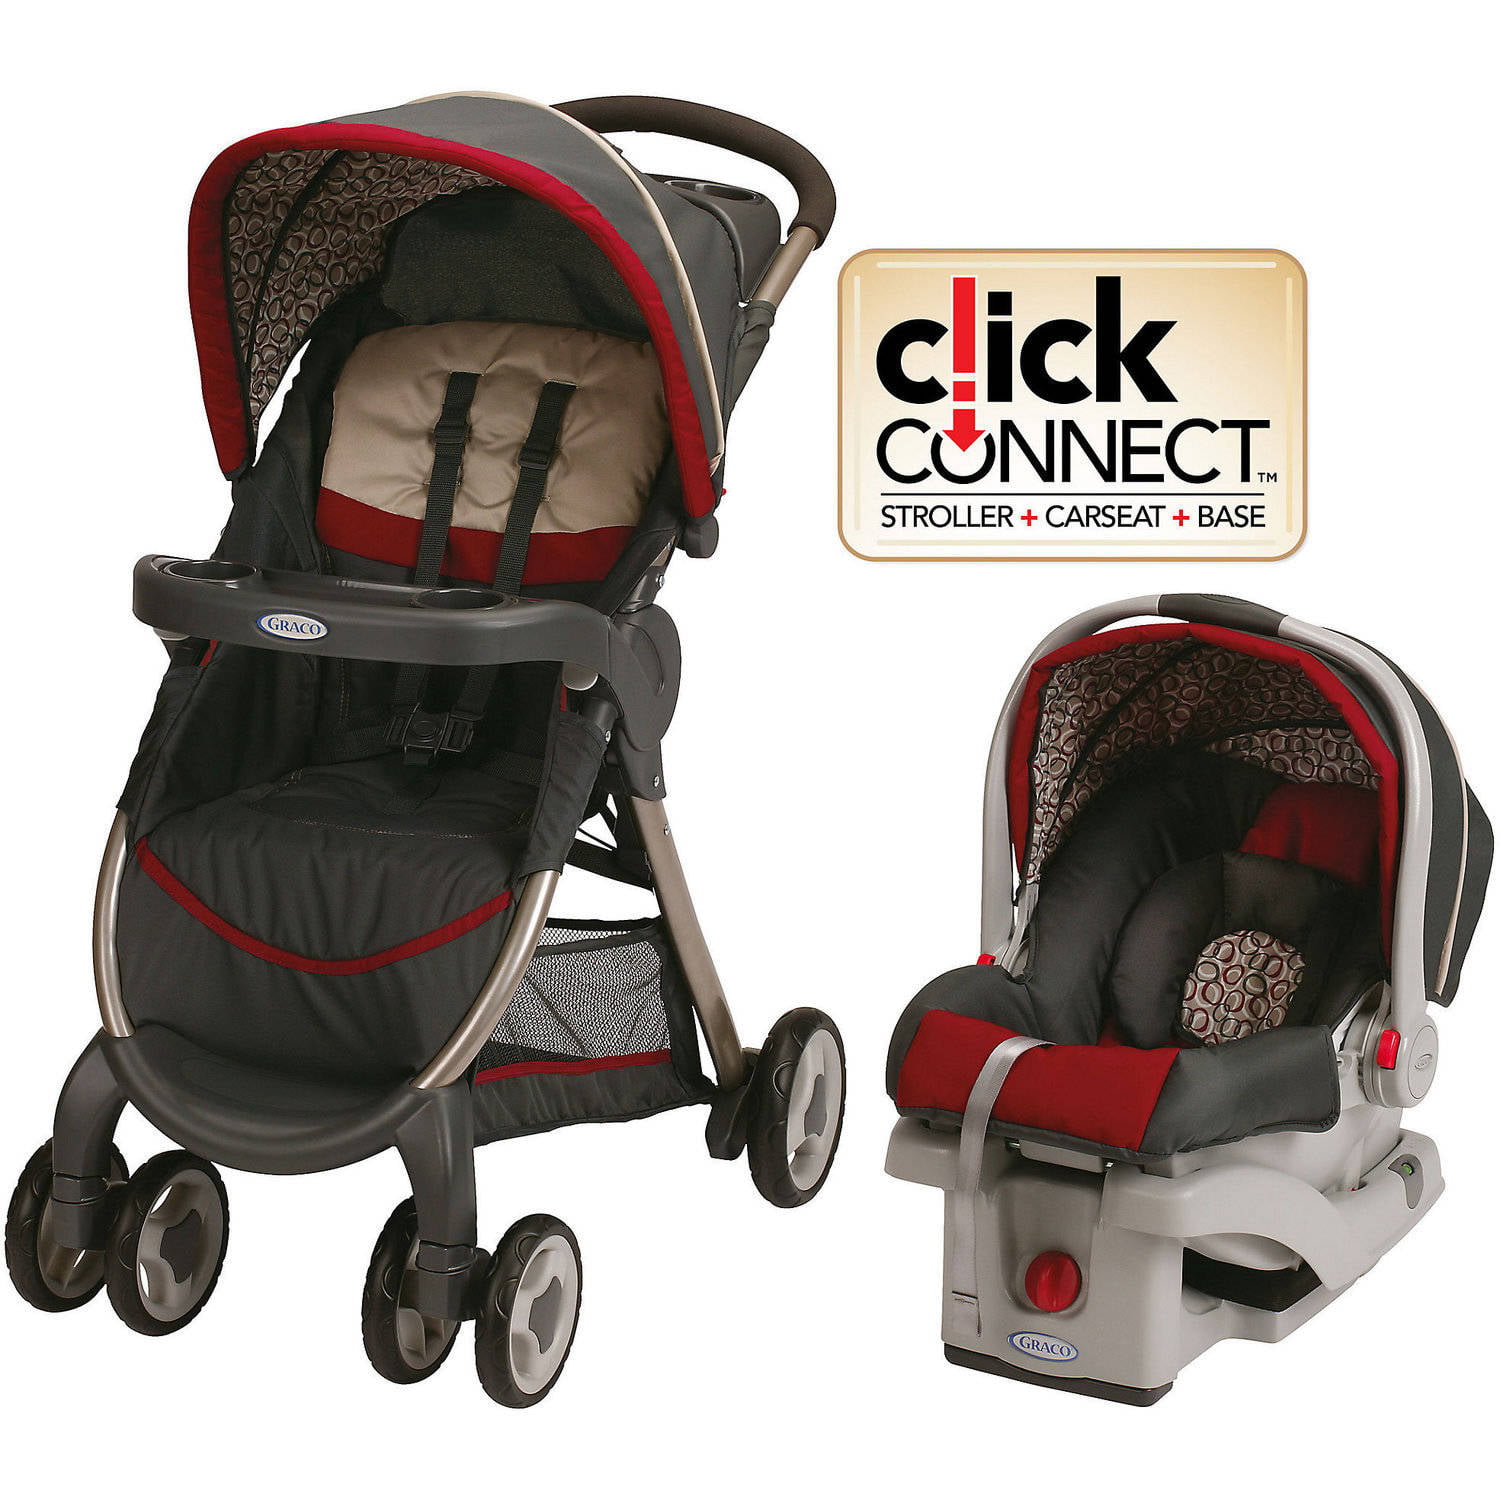 graco click connect infant car seat and stroller